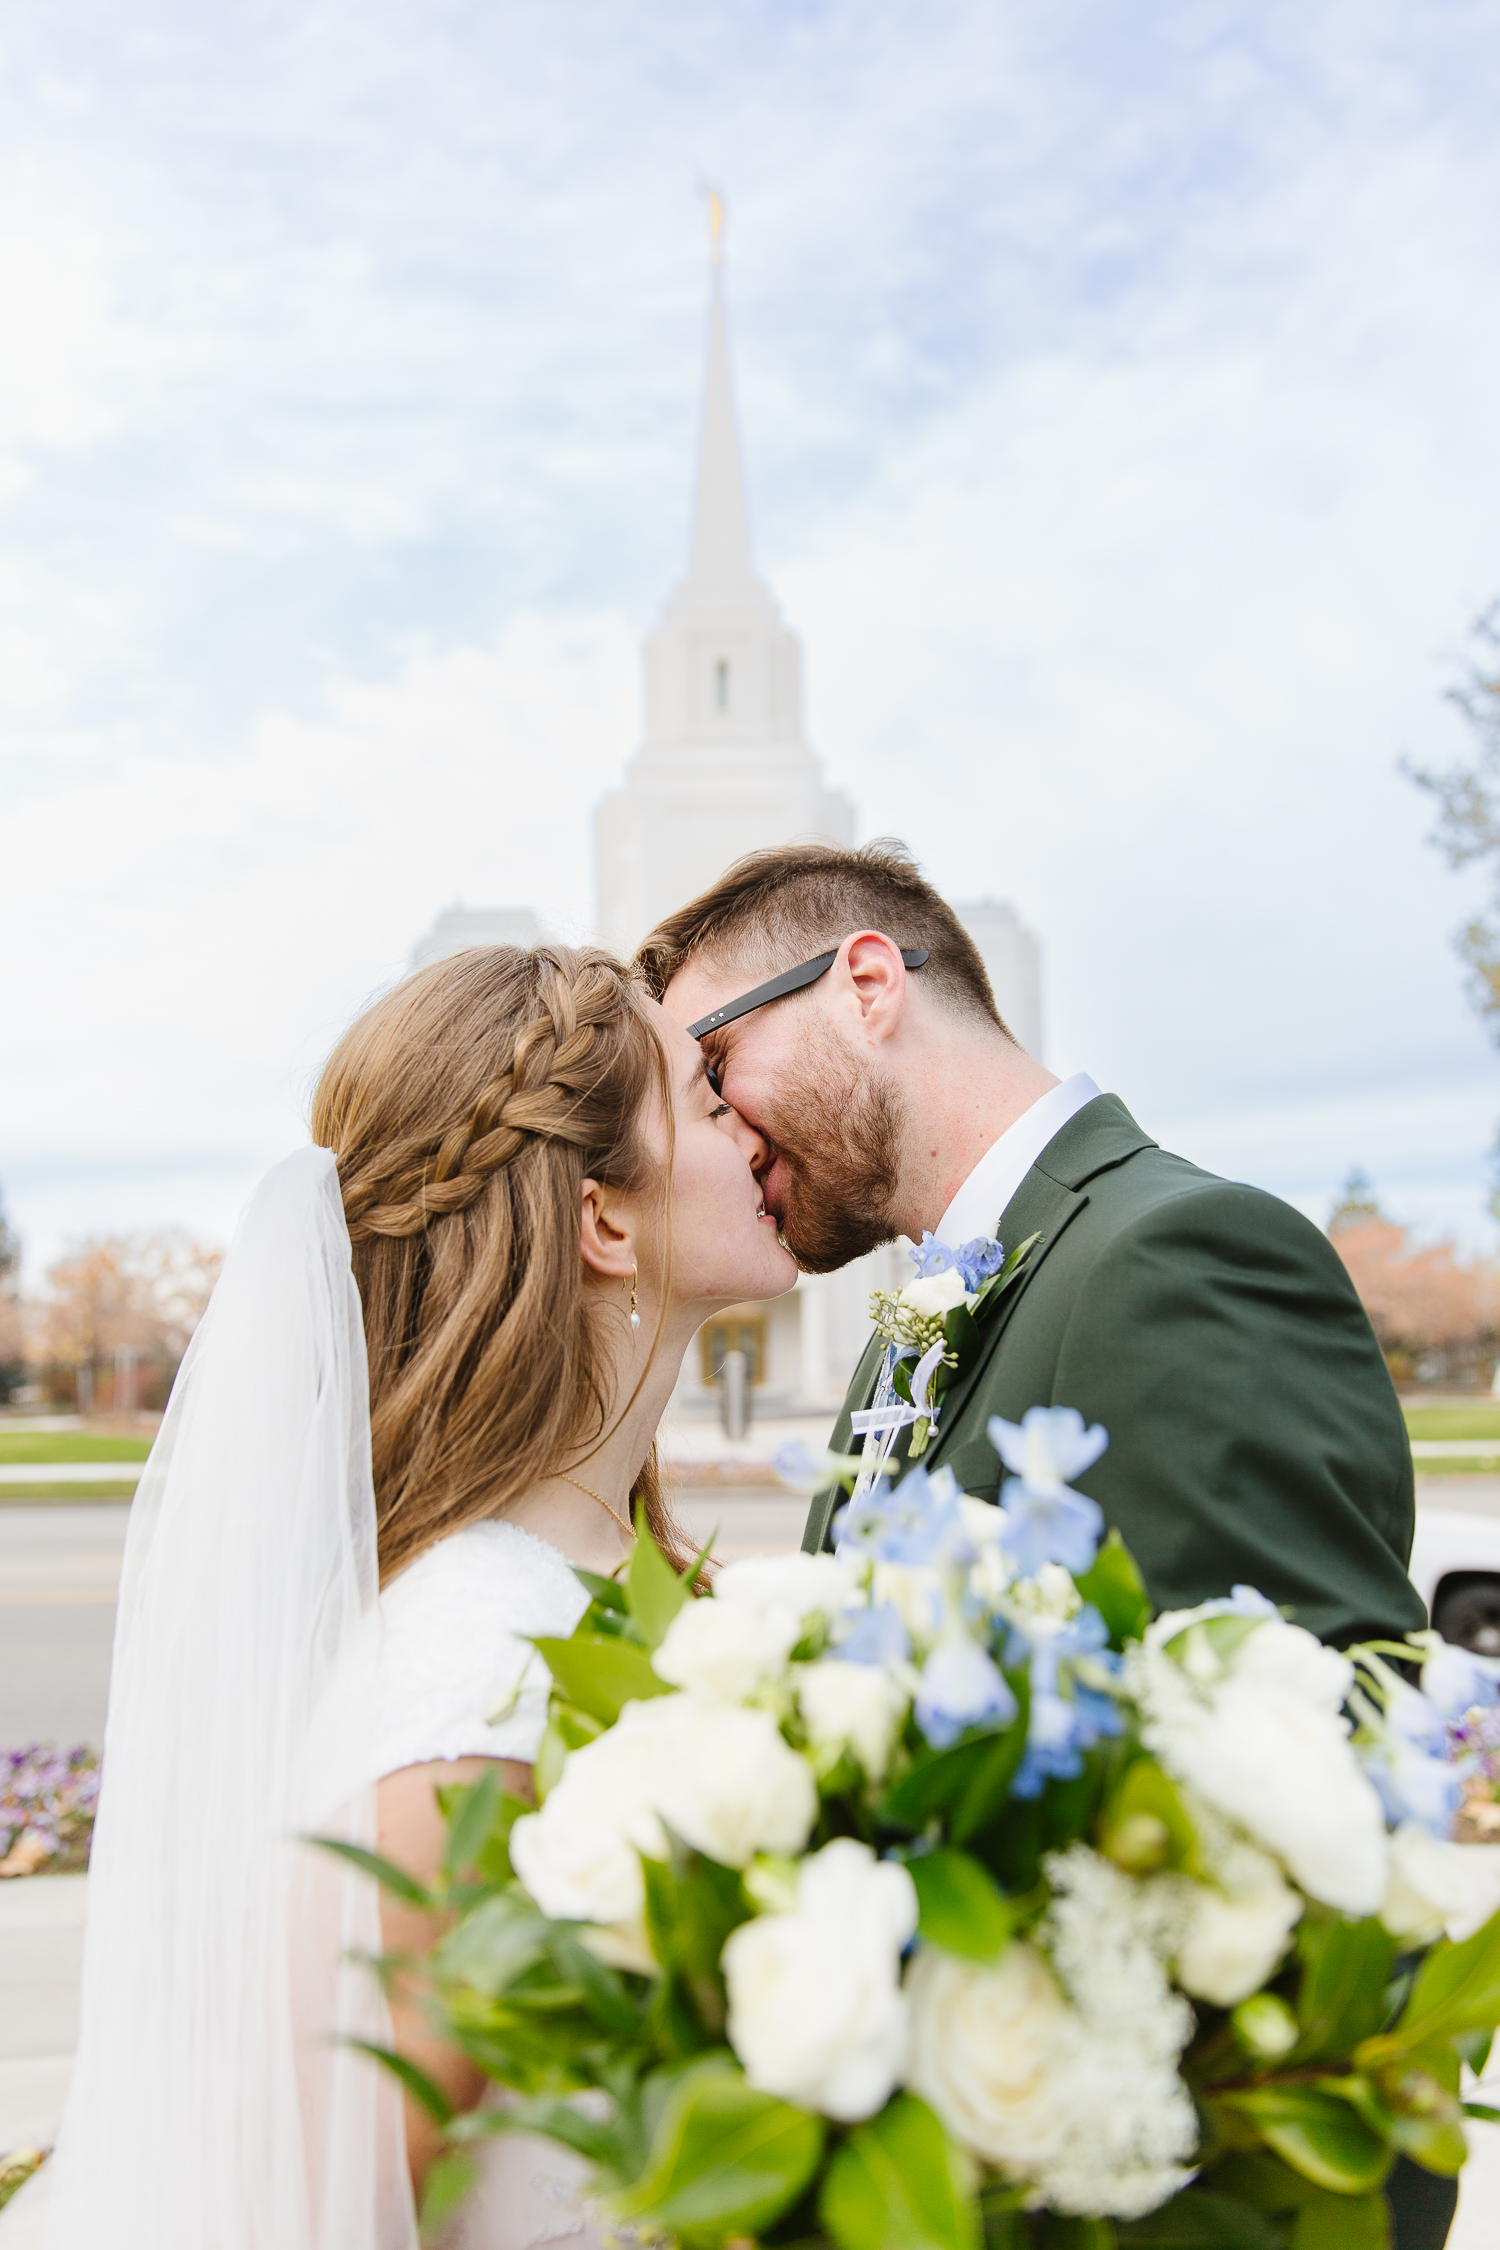 Utah Temple Photographer | Utah Wedding PhotographerLDS temple weddings l Wedding inspiration l Wedding bouquets l Wedding rings l Wedding day l Brigham City Temple l Wedding reception inspiration l What to wear on your wedding day l Leianne Phillips Photography